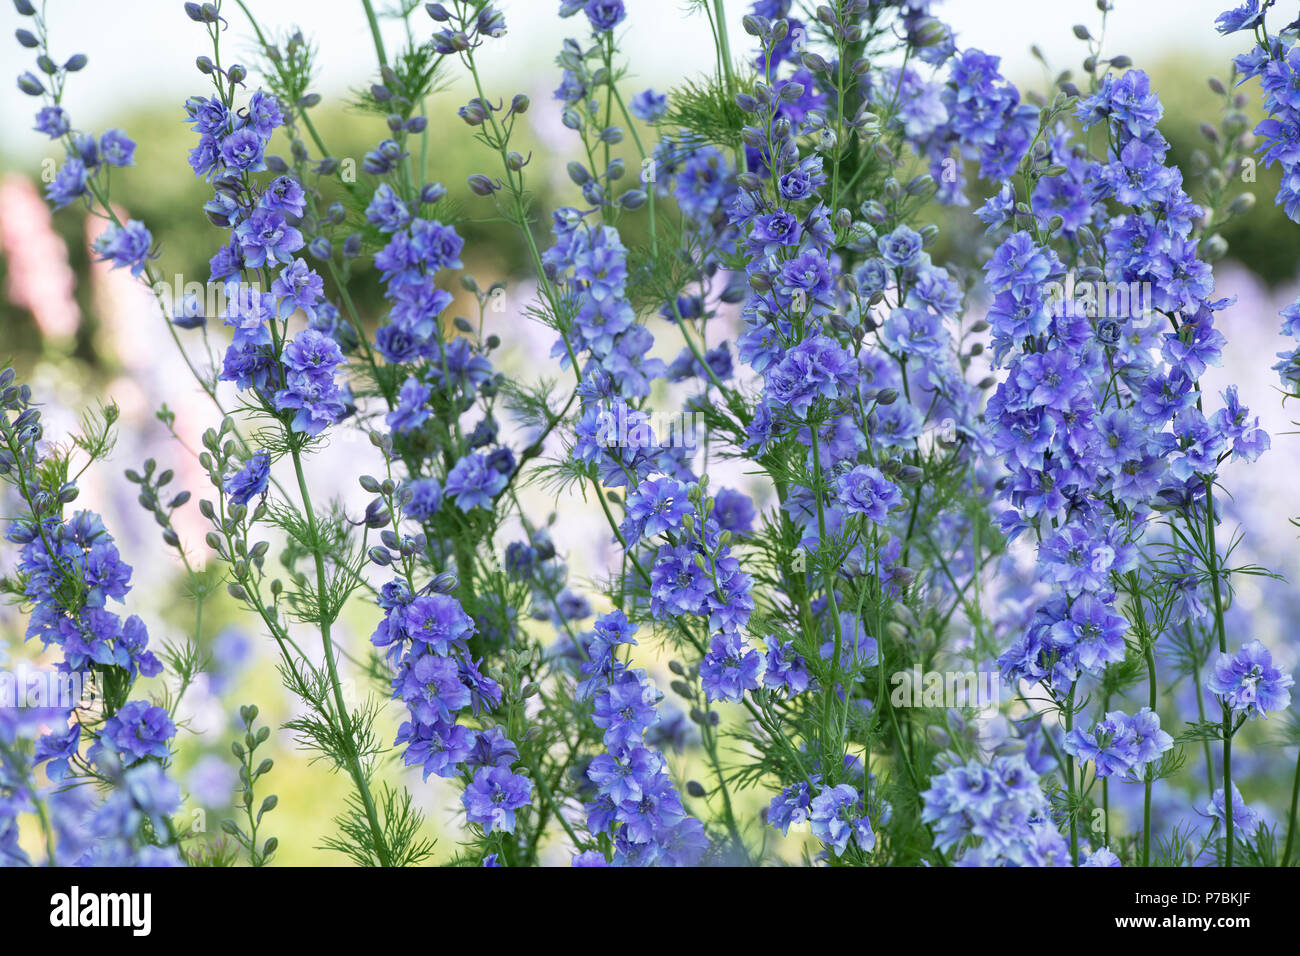 Blue Delphinium flowers growing in a field at the Real Flower Petal Confetti company flower fields in Wick, Pershore, Worcestershire. UK Stock Photo